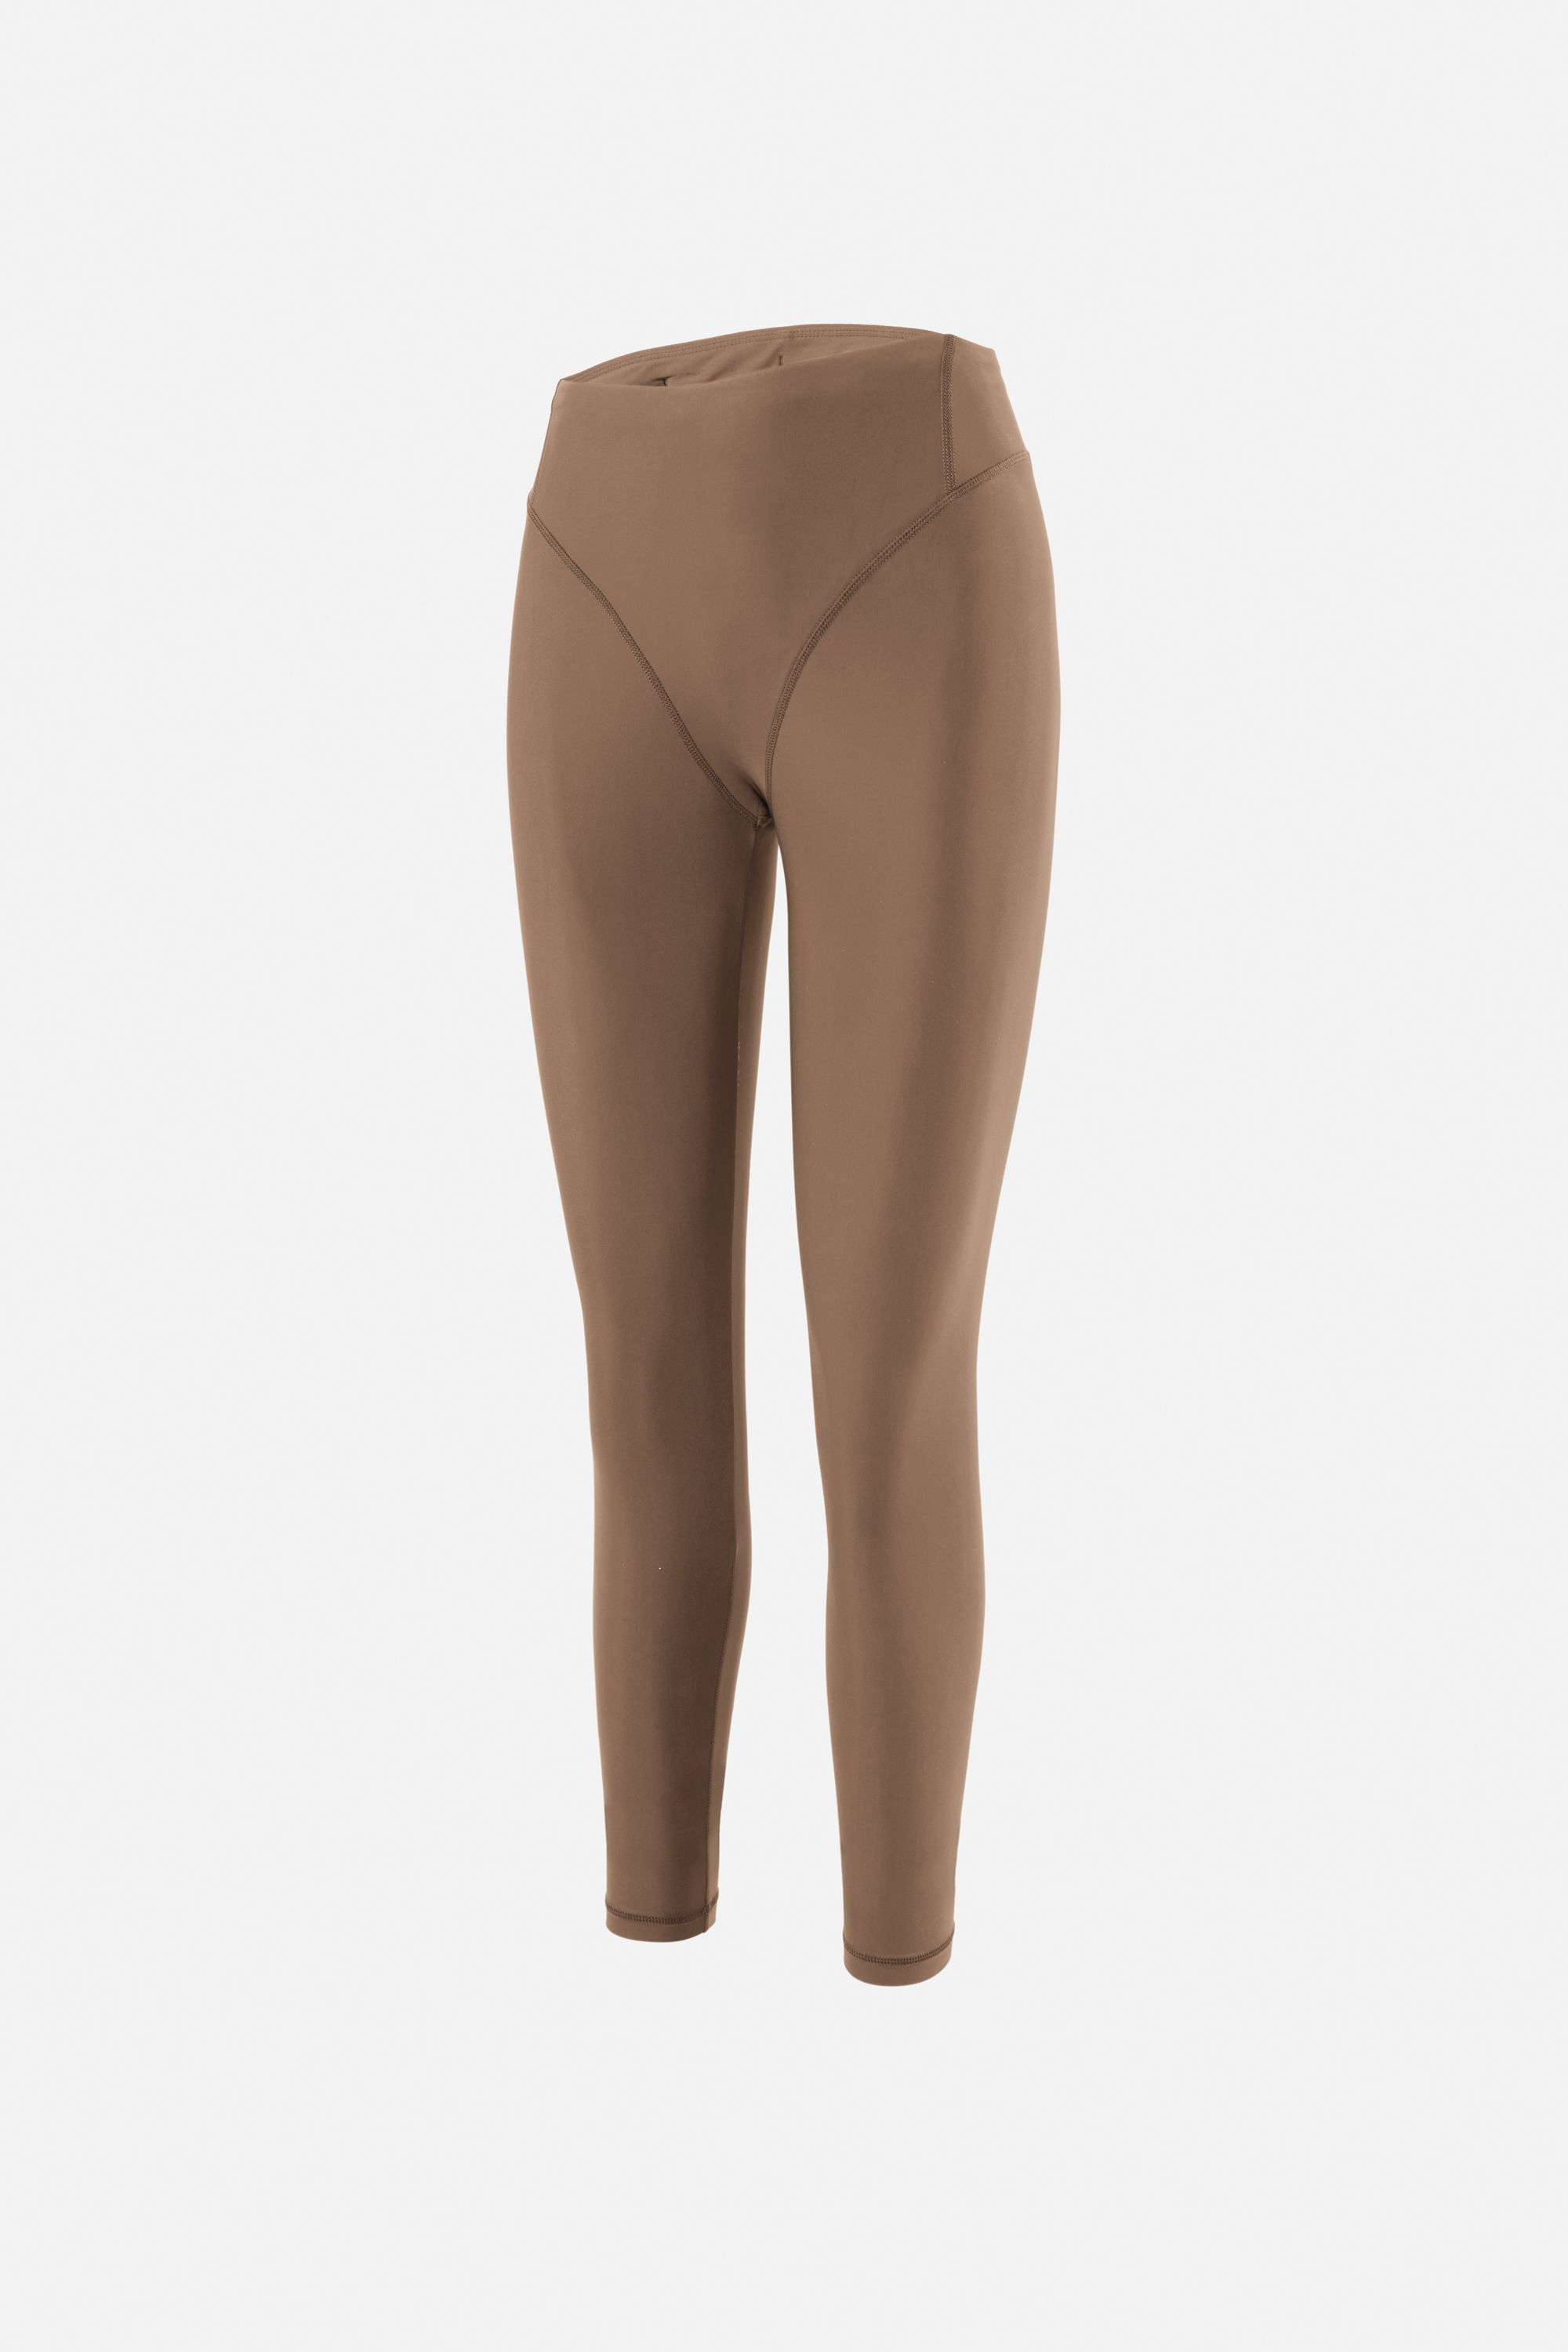 Silvy Solid Lycra Tights For Women - Brown